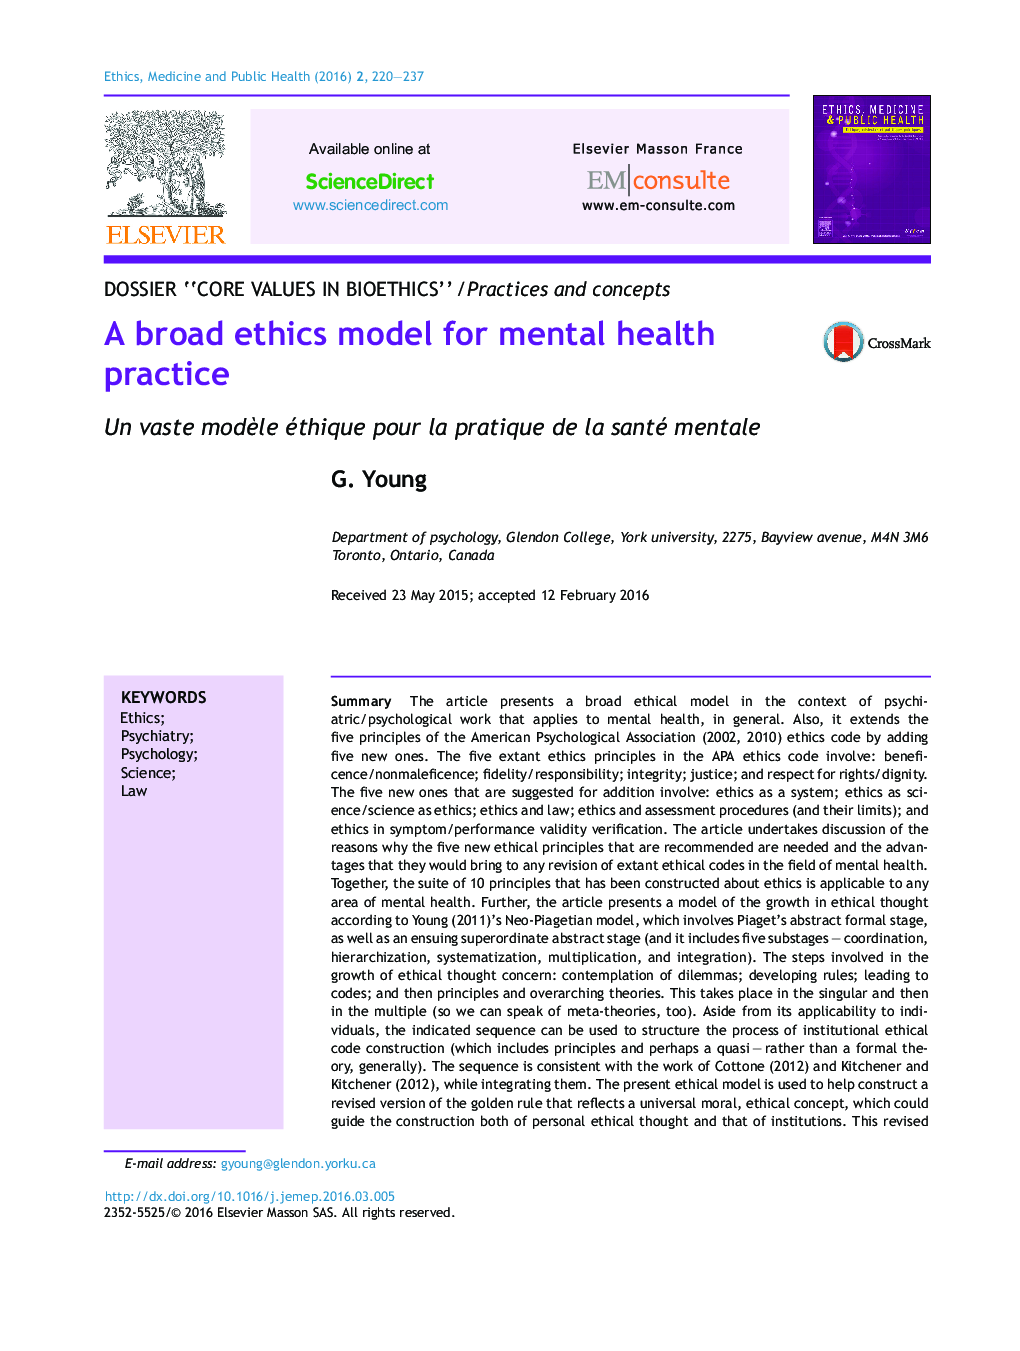 A broad ethics model for mental health practice